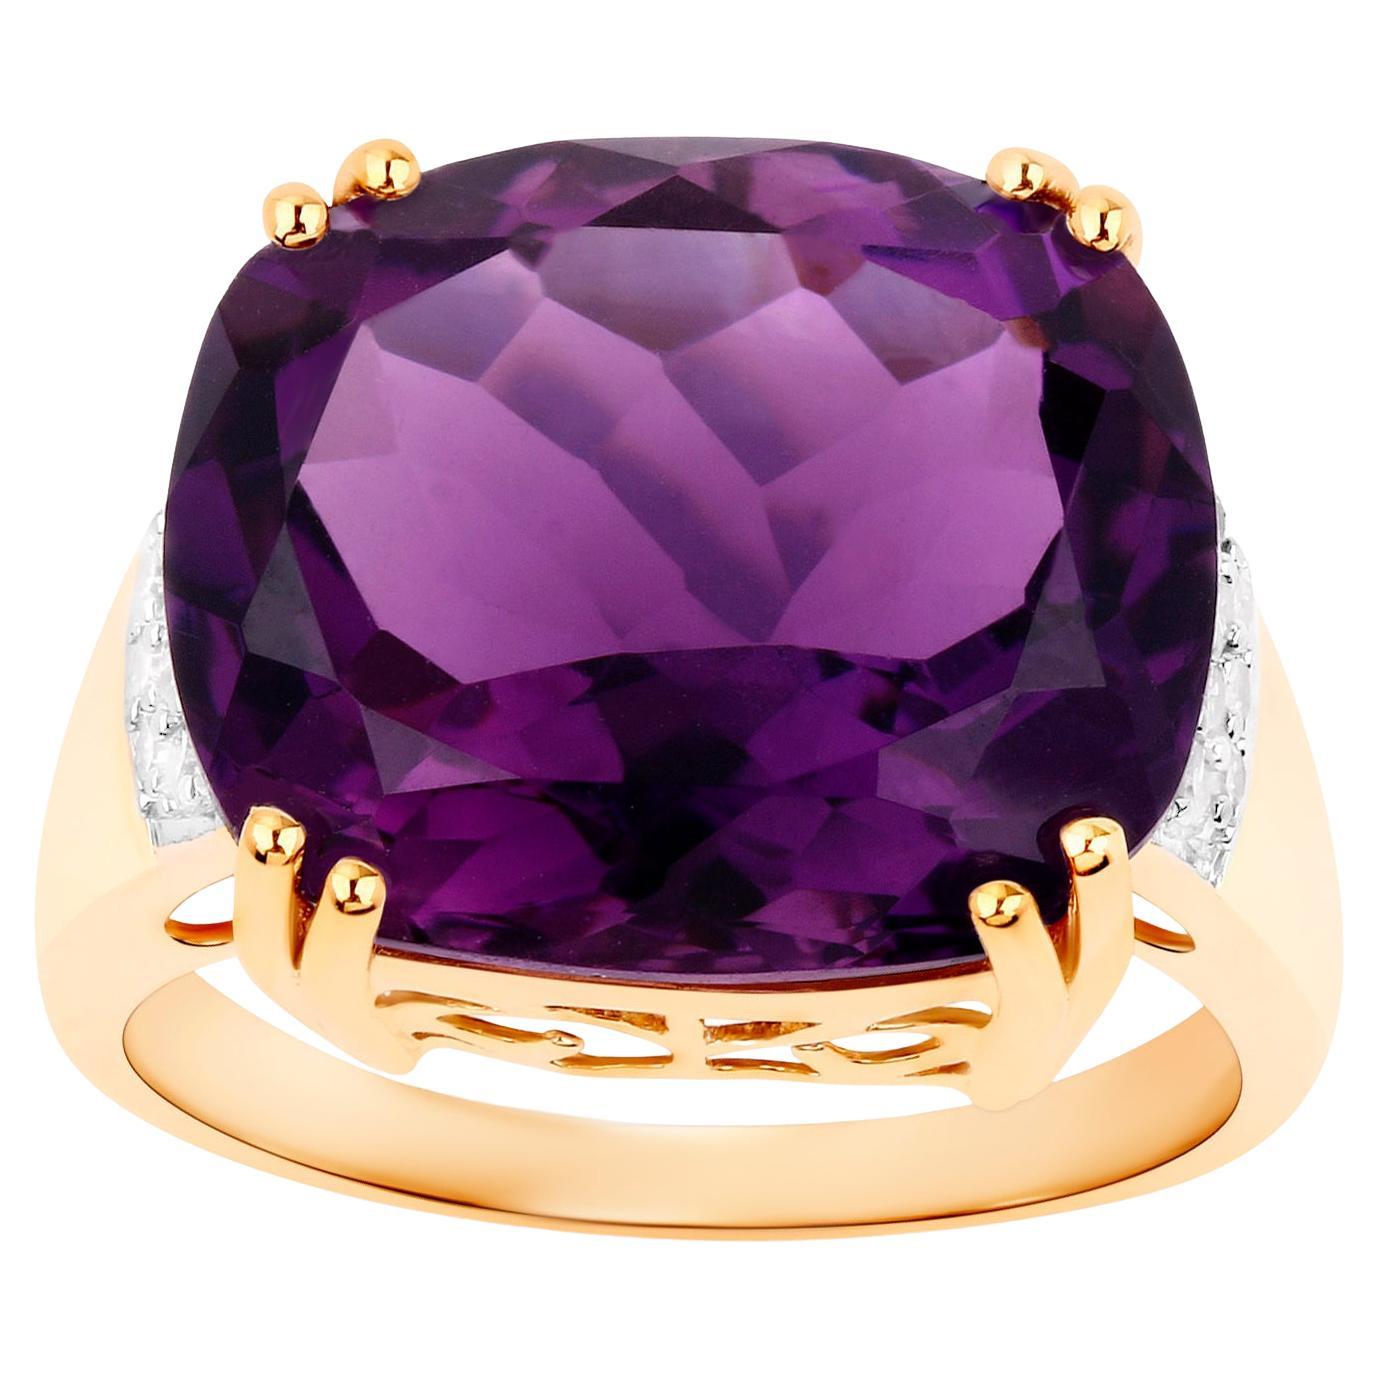 Natural Amethyst Statement Ring Diamond Setting 11.5 Carats 14K Gold For Sale